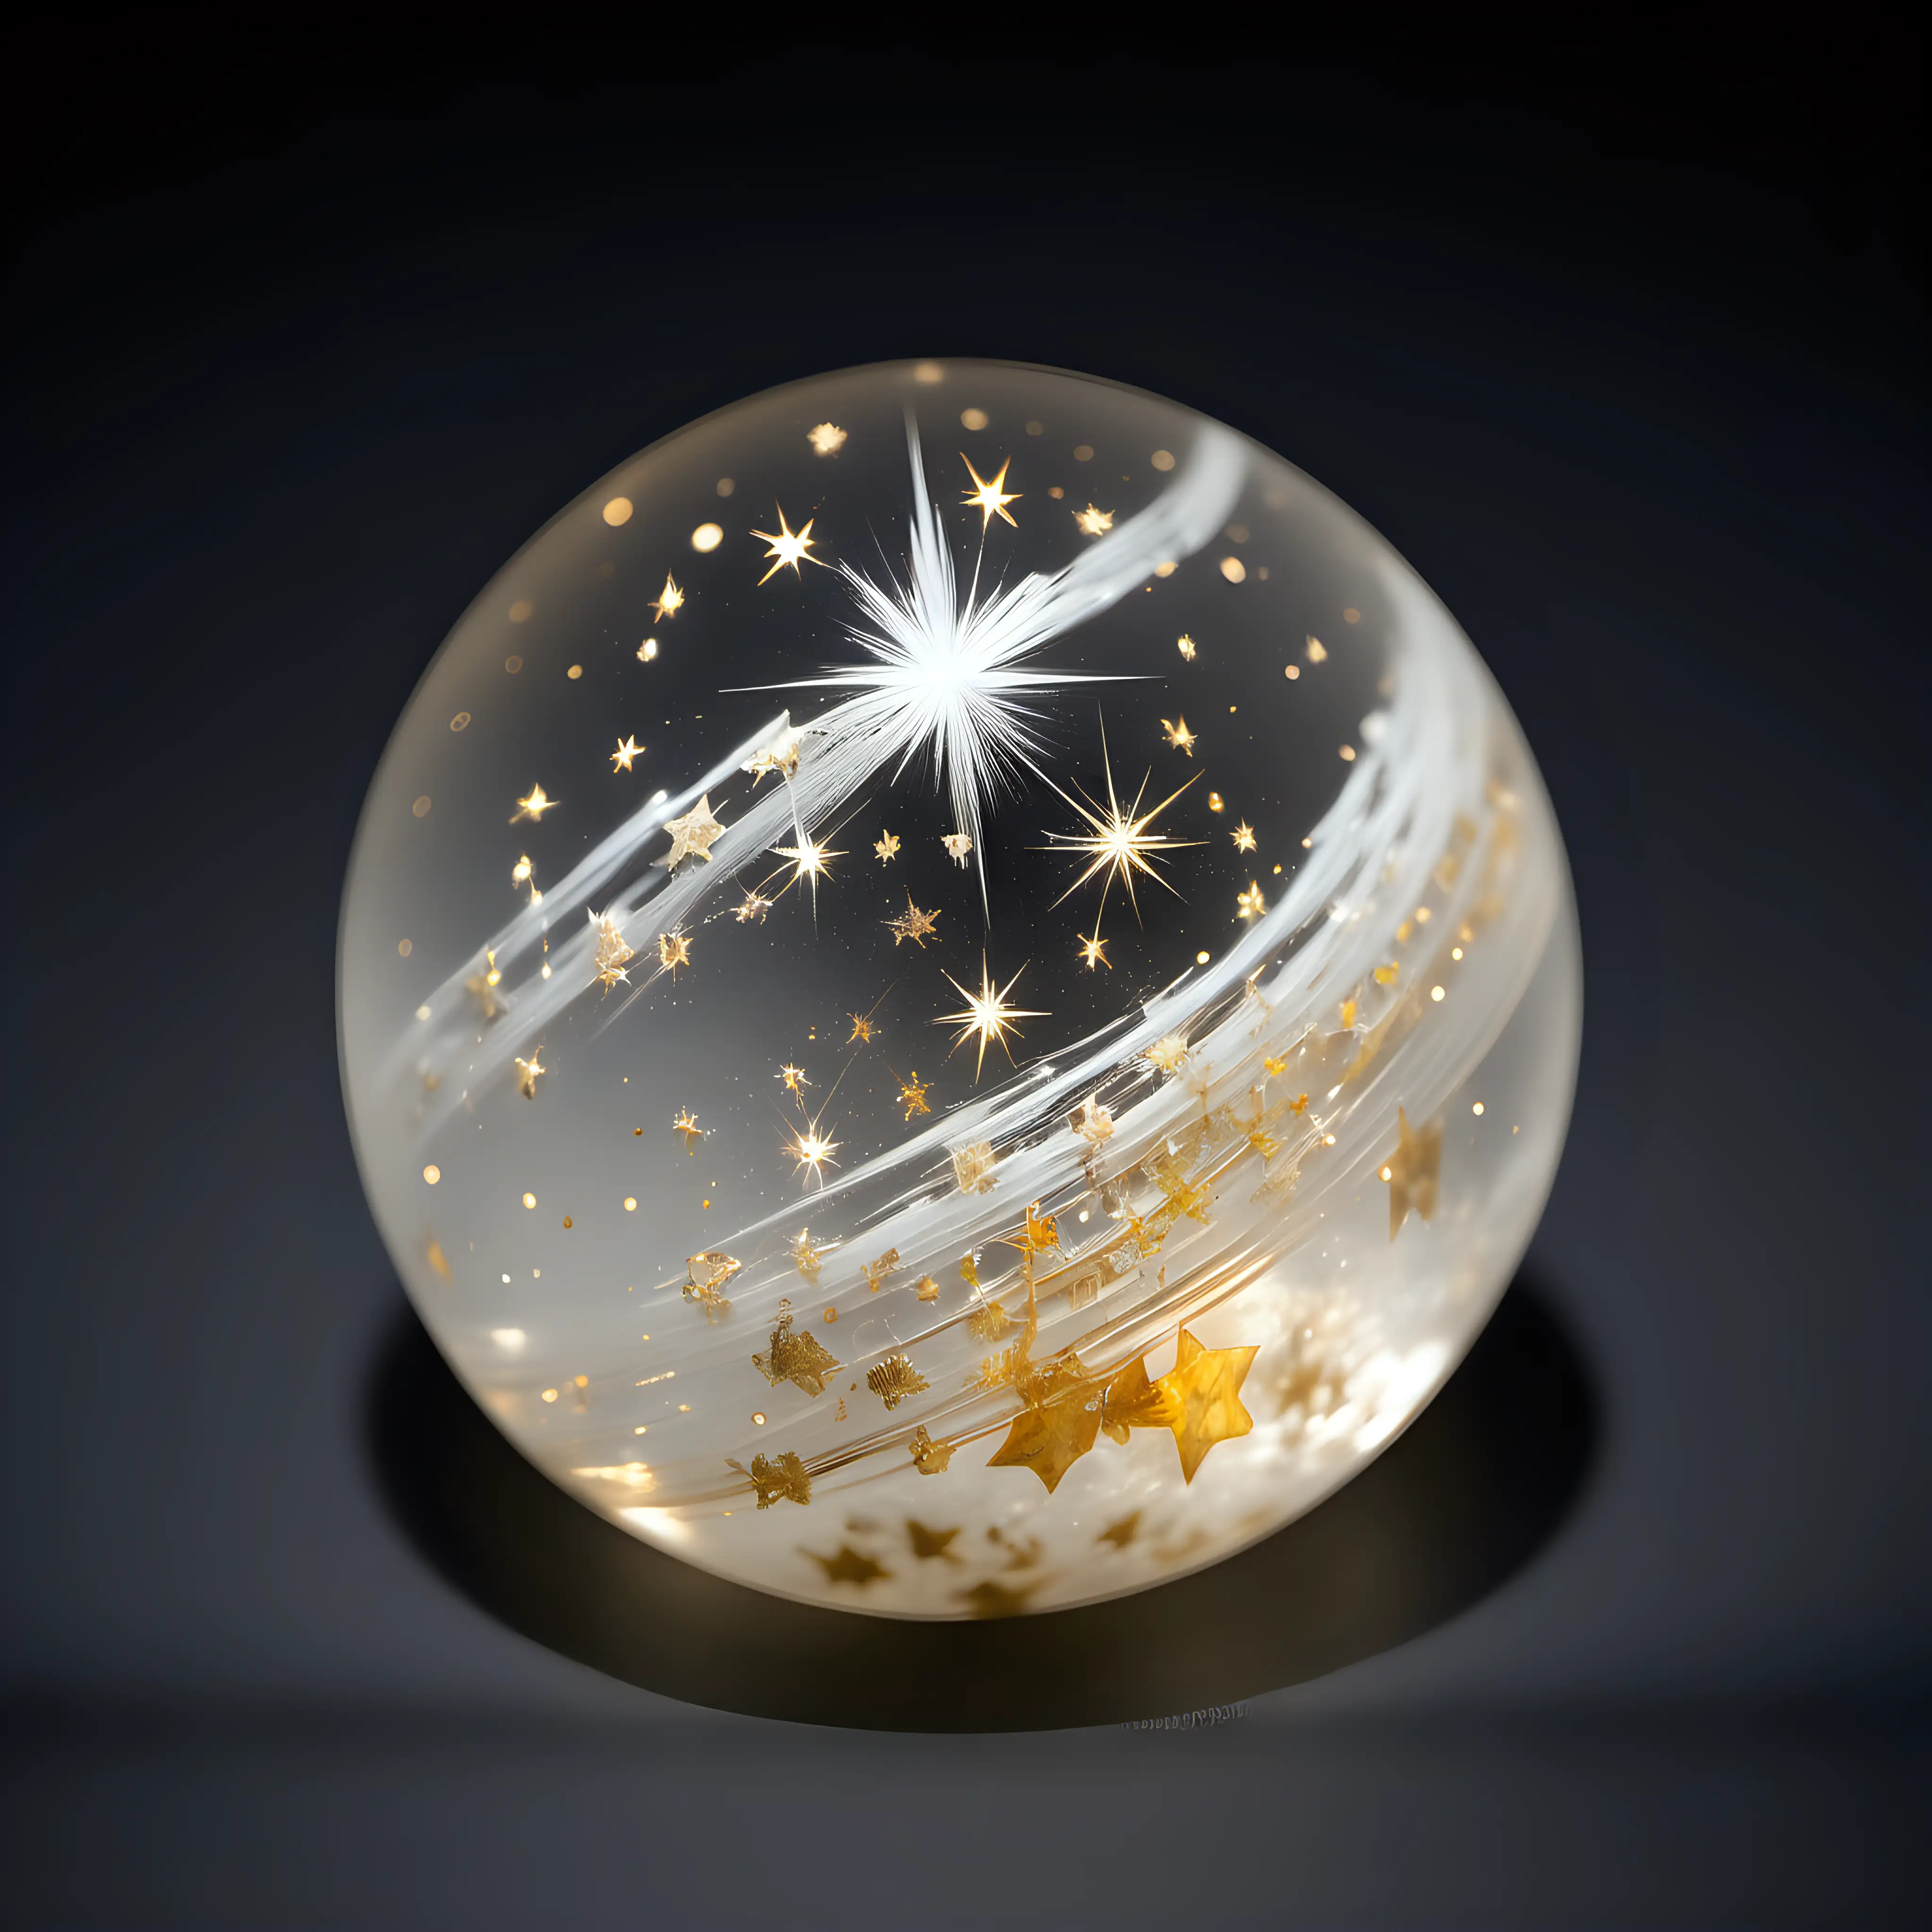 Ethereal GoldenWhite Stone with Starry Veins